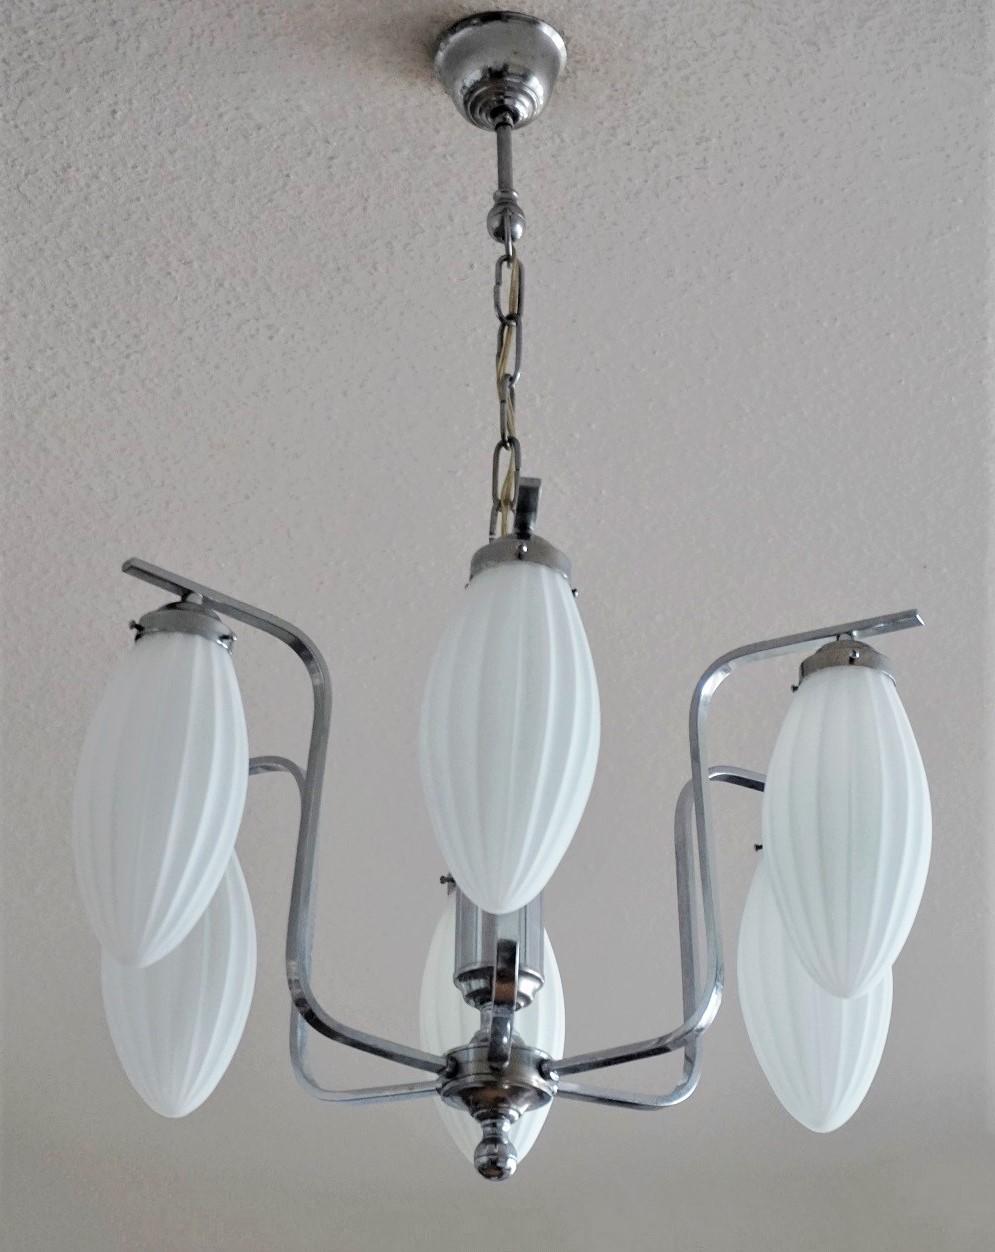 Stained Midcentury Italian Chromed Chandelier with Six Satin White Glass Globes, 1960s For Sale